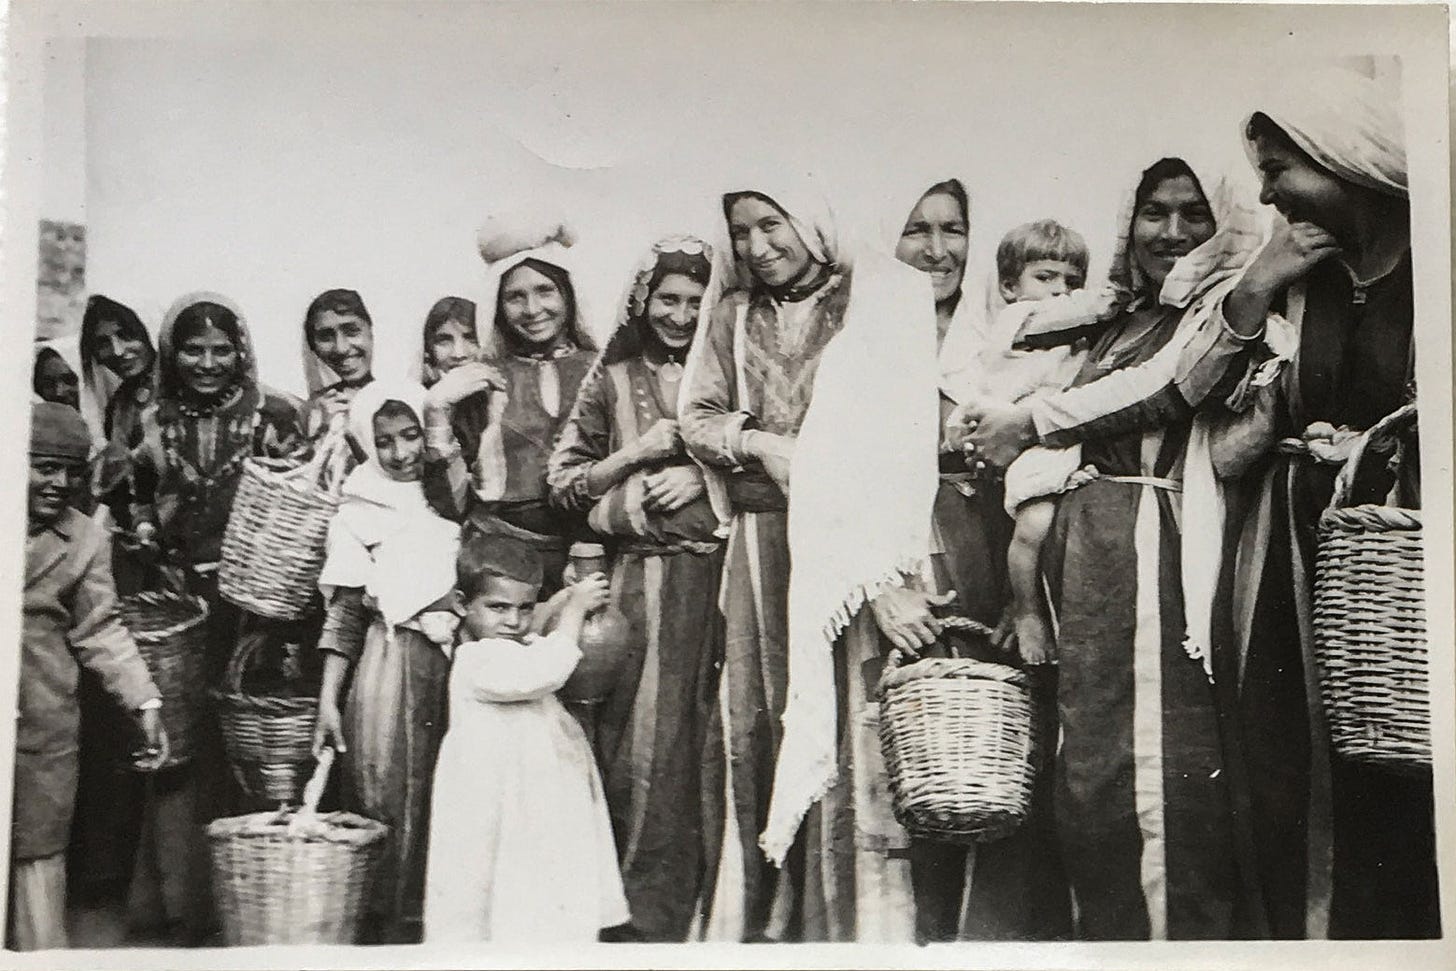 A sepia-toned old photo of a group of Palestinian women and children smiling at the camera.